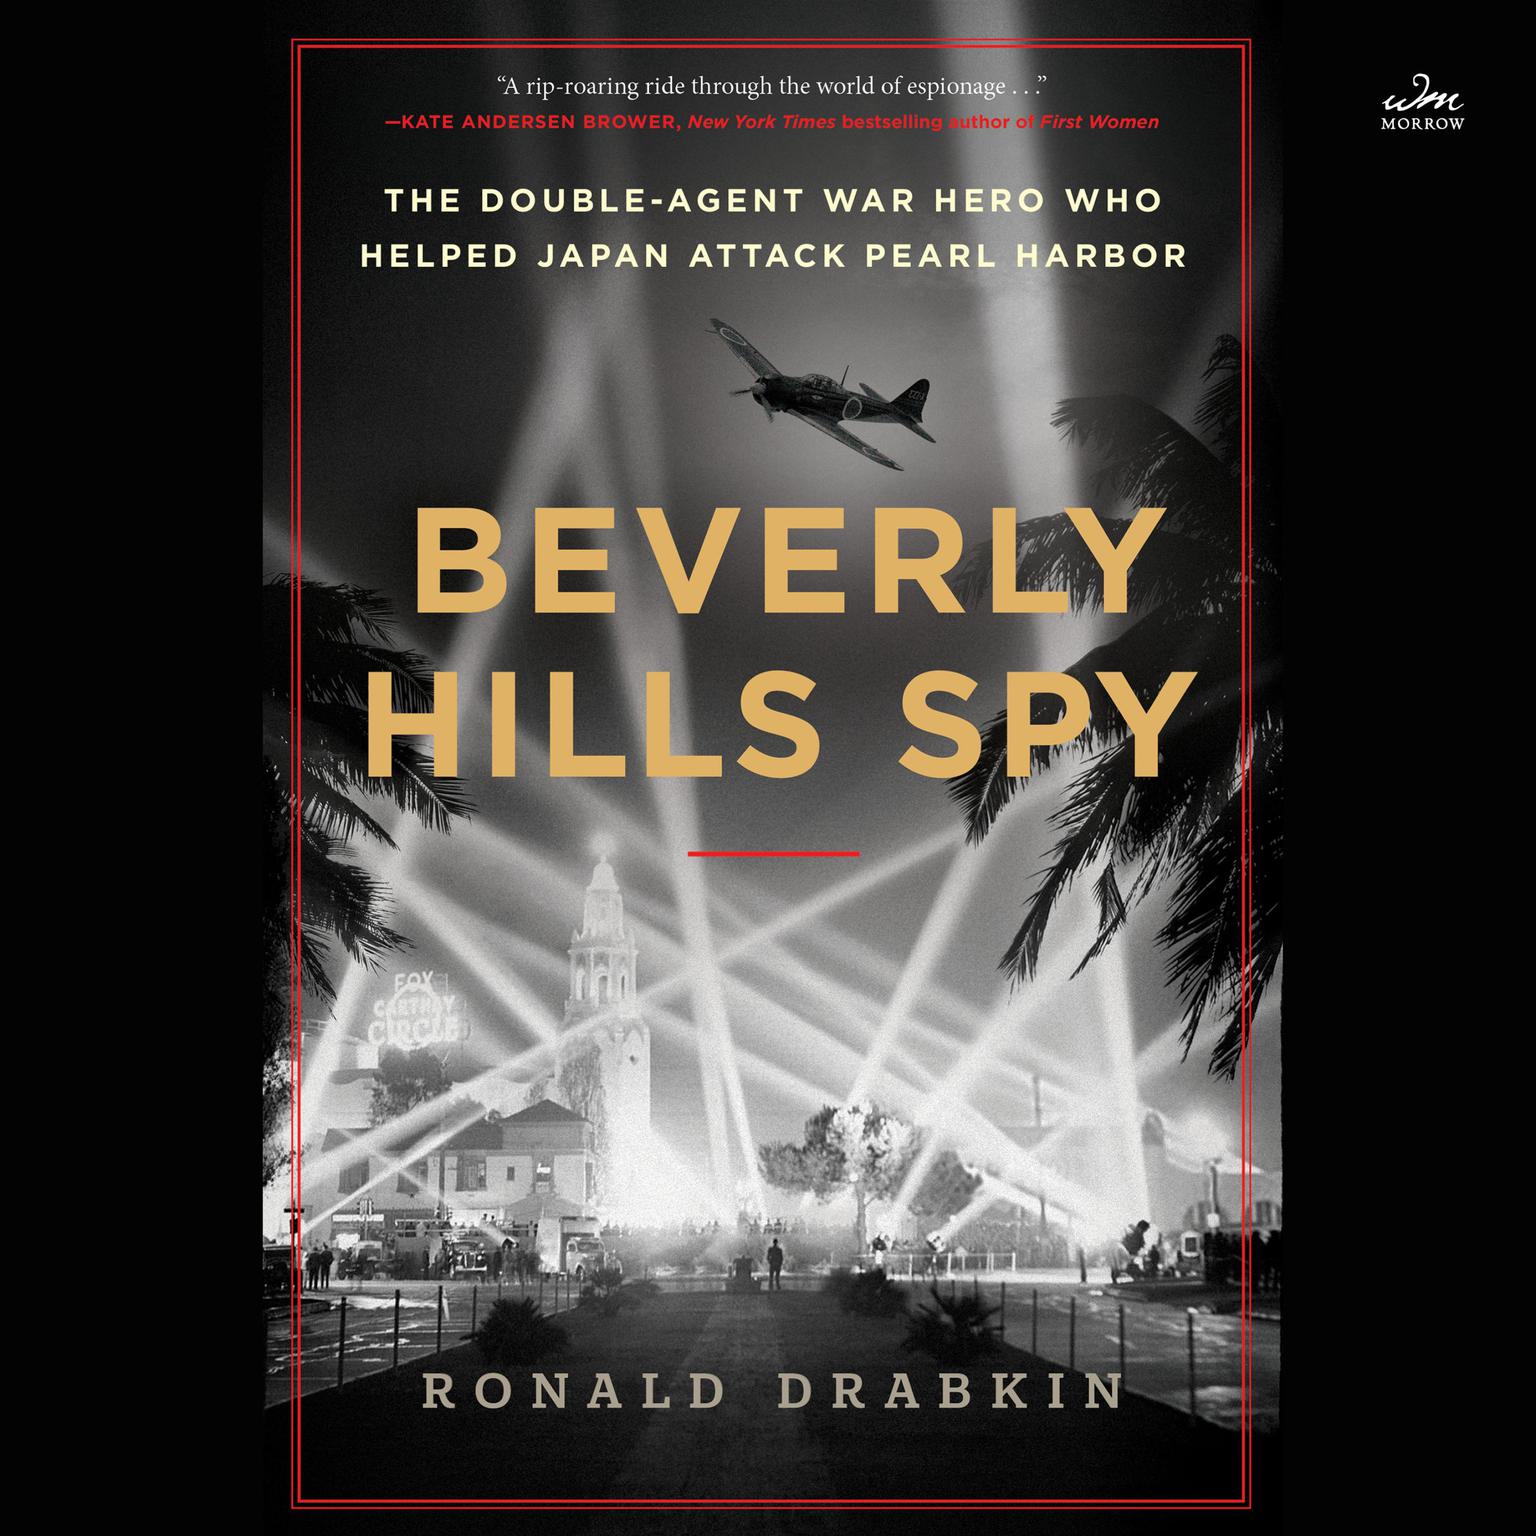 Beverly Hills Spy: The Double-Agent War Hero Who Helped Japan Attack Pearl Harbor Audiobook, by Ronald Drabkin